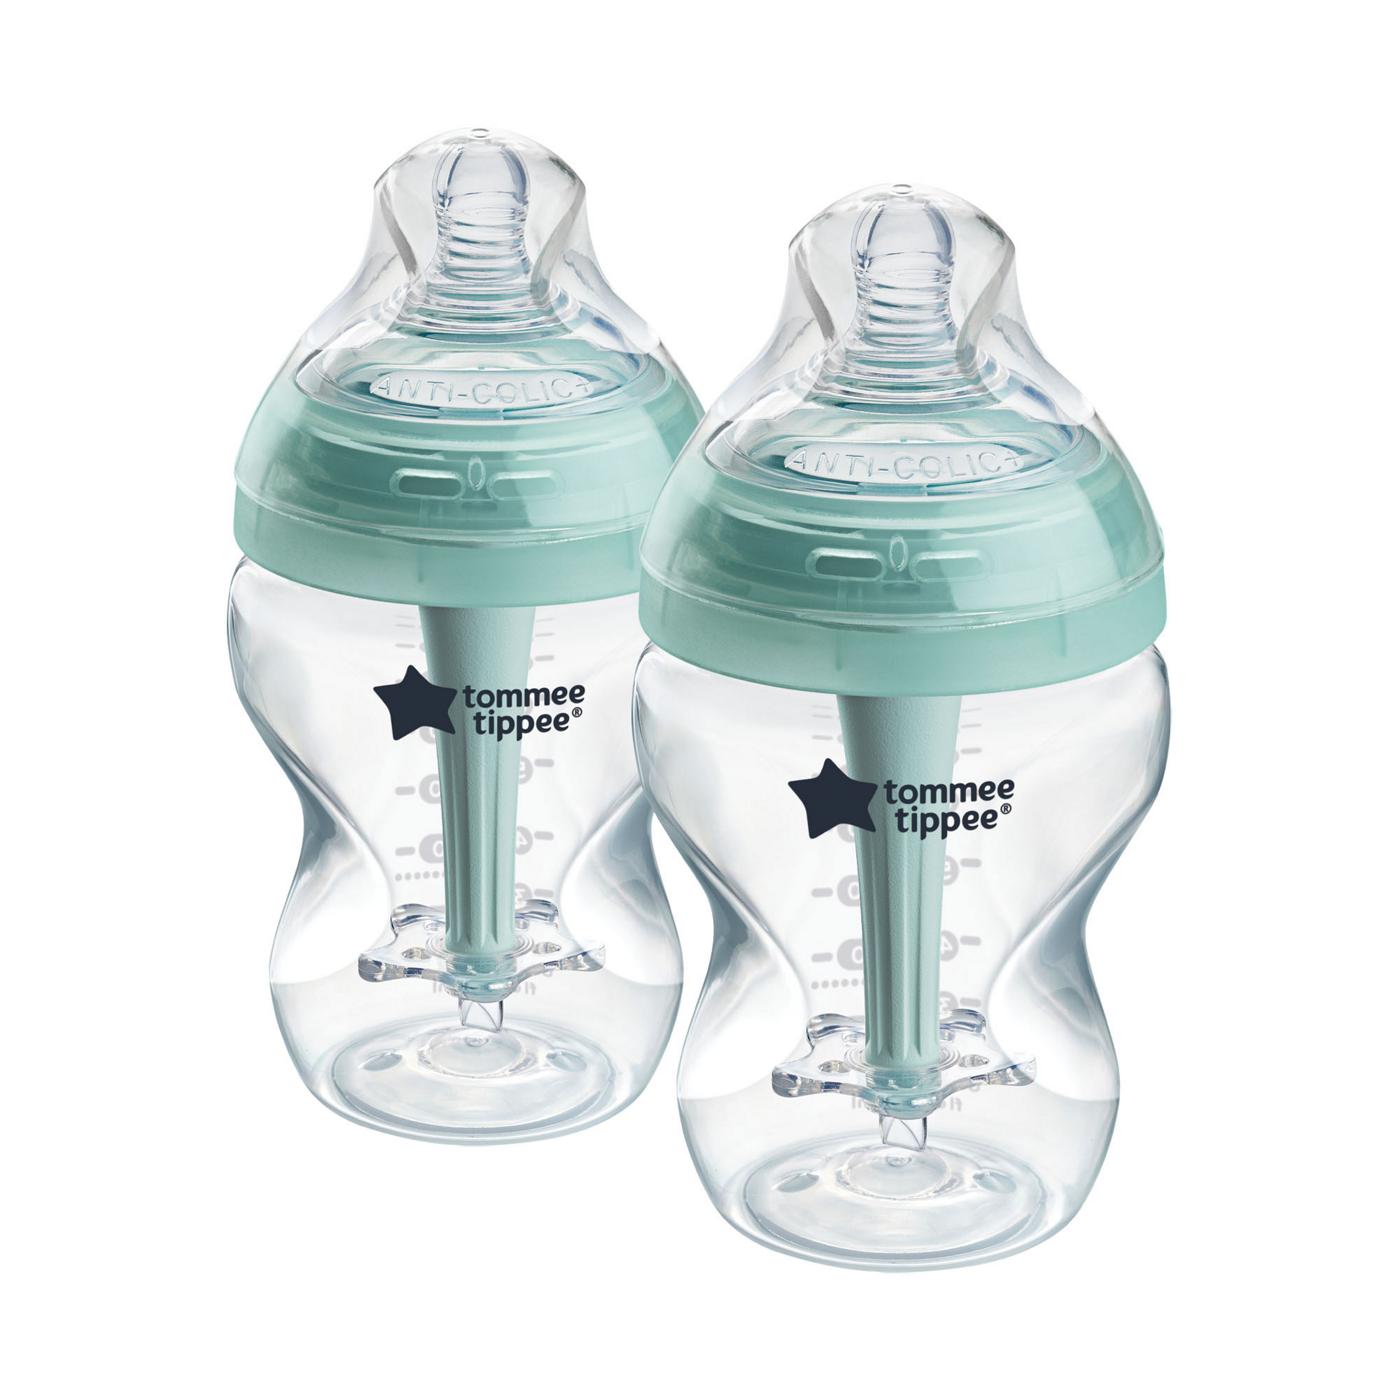 Tommee Tippee Advanced Anti-Colic Bottles; image 2 of 3